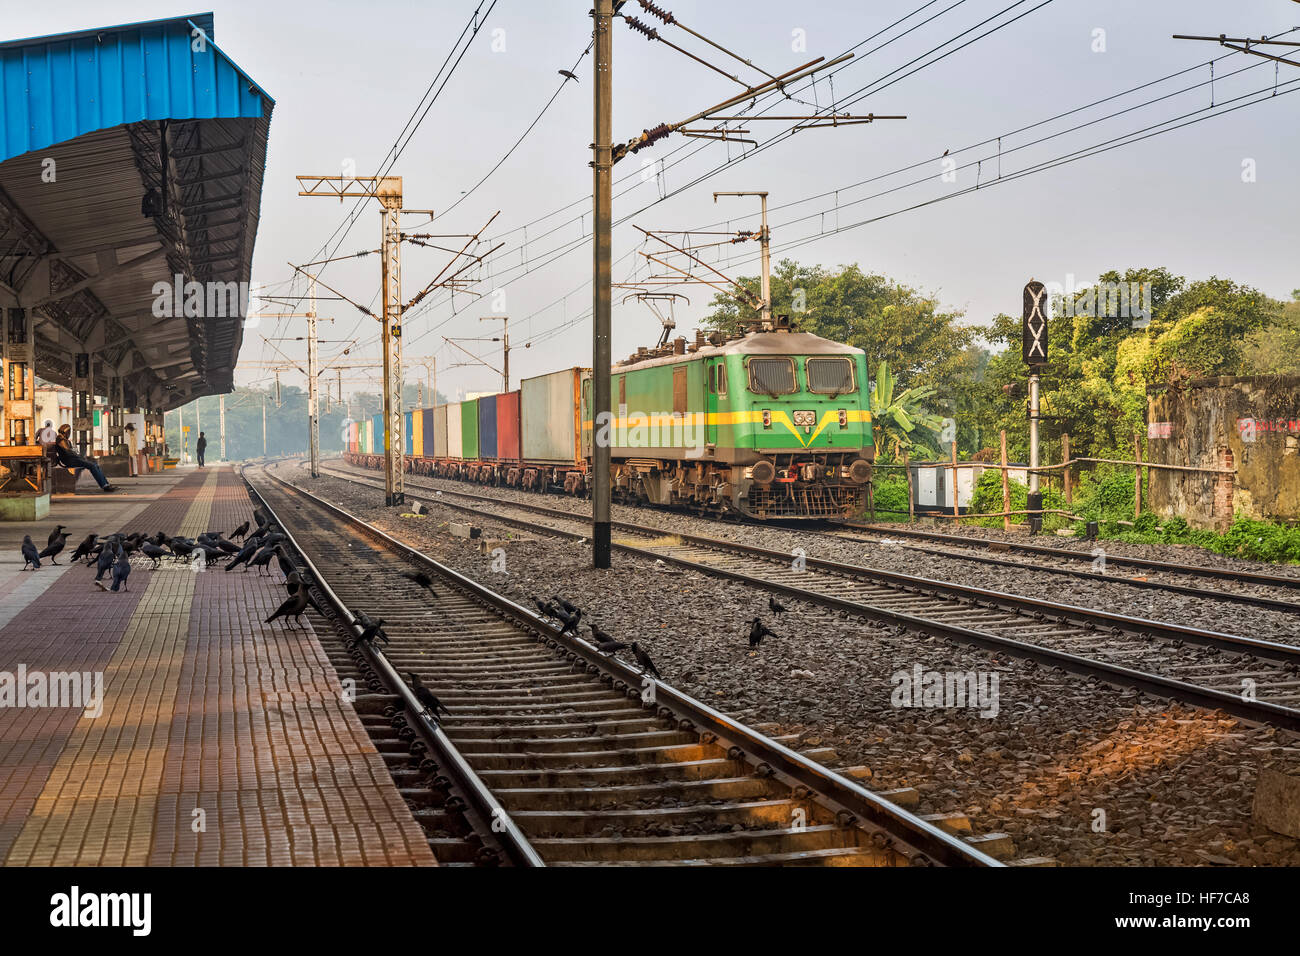 Cargo train of the Indian railways crossing a deserted railway station on a foggy winter morning. Stock Photo